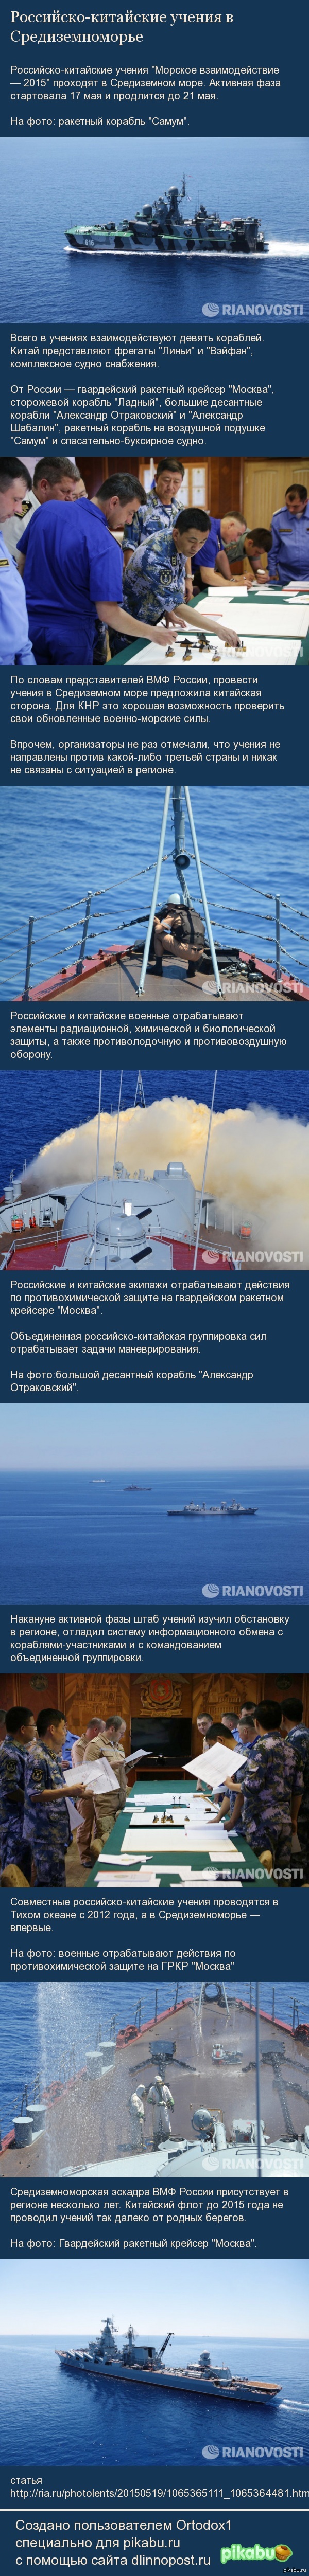 Russian-Chinese exercises in the Mediterranean - Russia, China, Navy, Ship, The photo, Teachings, Mediterranean Sea, Politics, Longpost